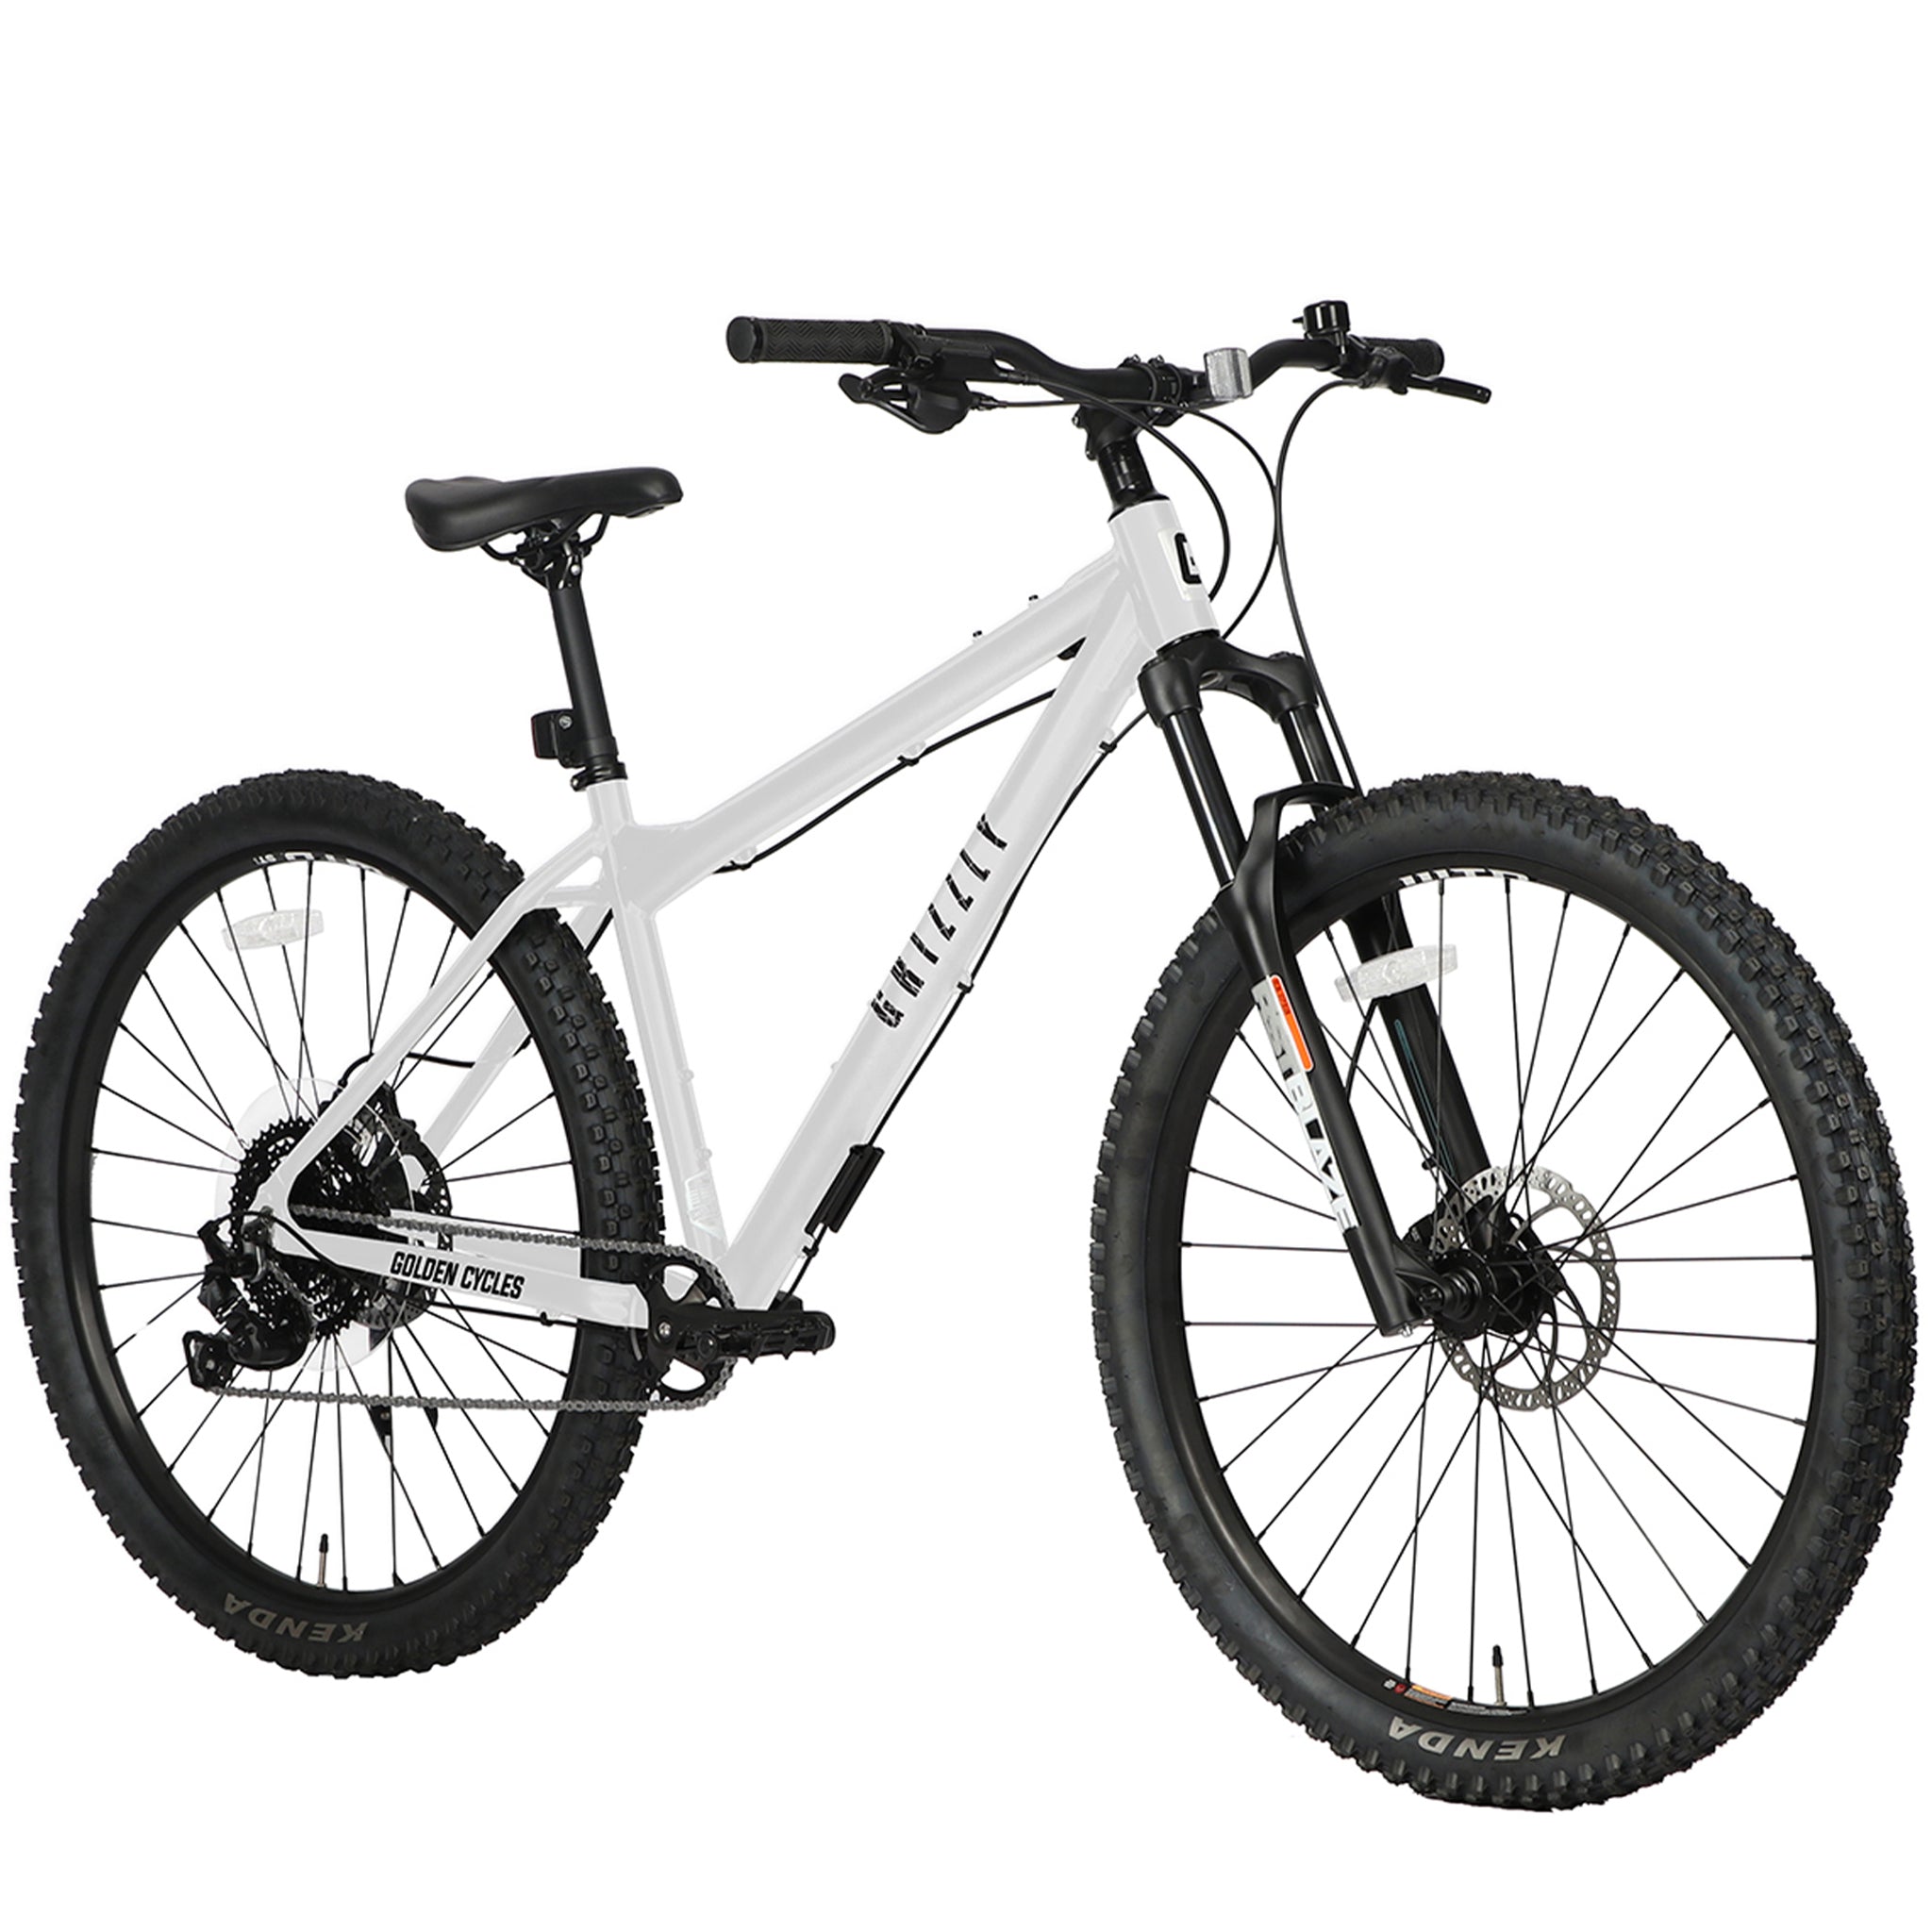 Grizzly MTB 29" - White